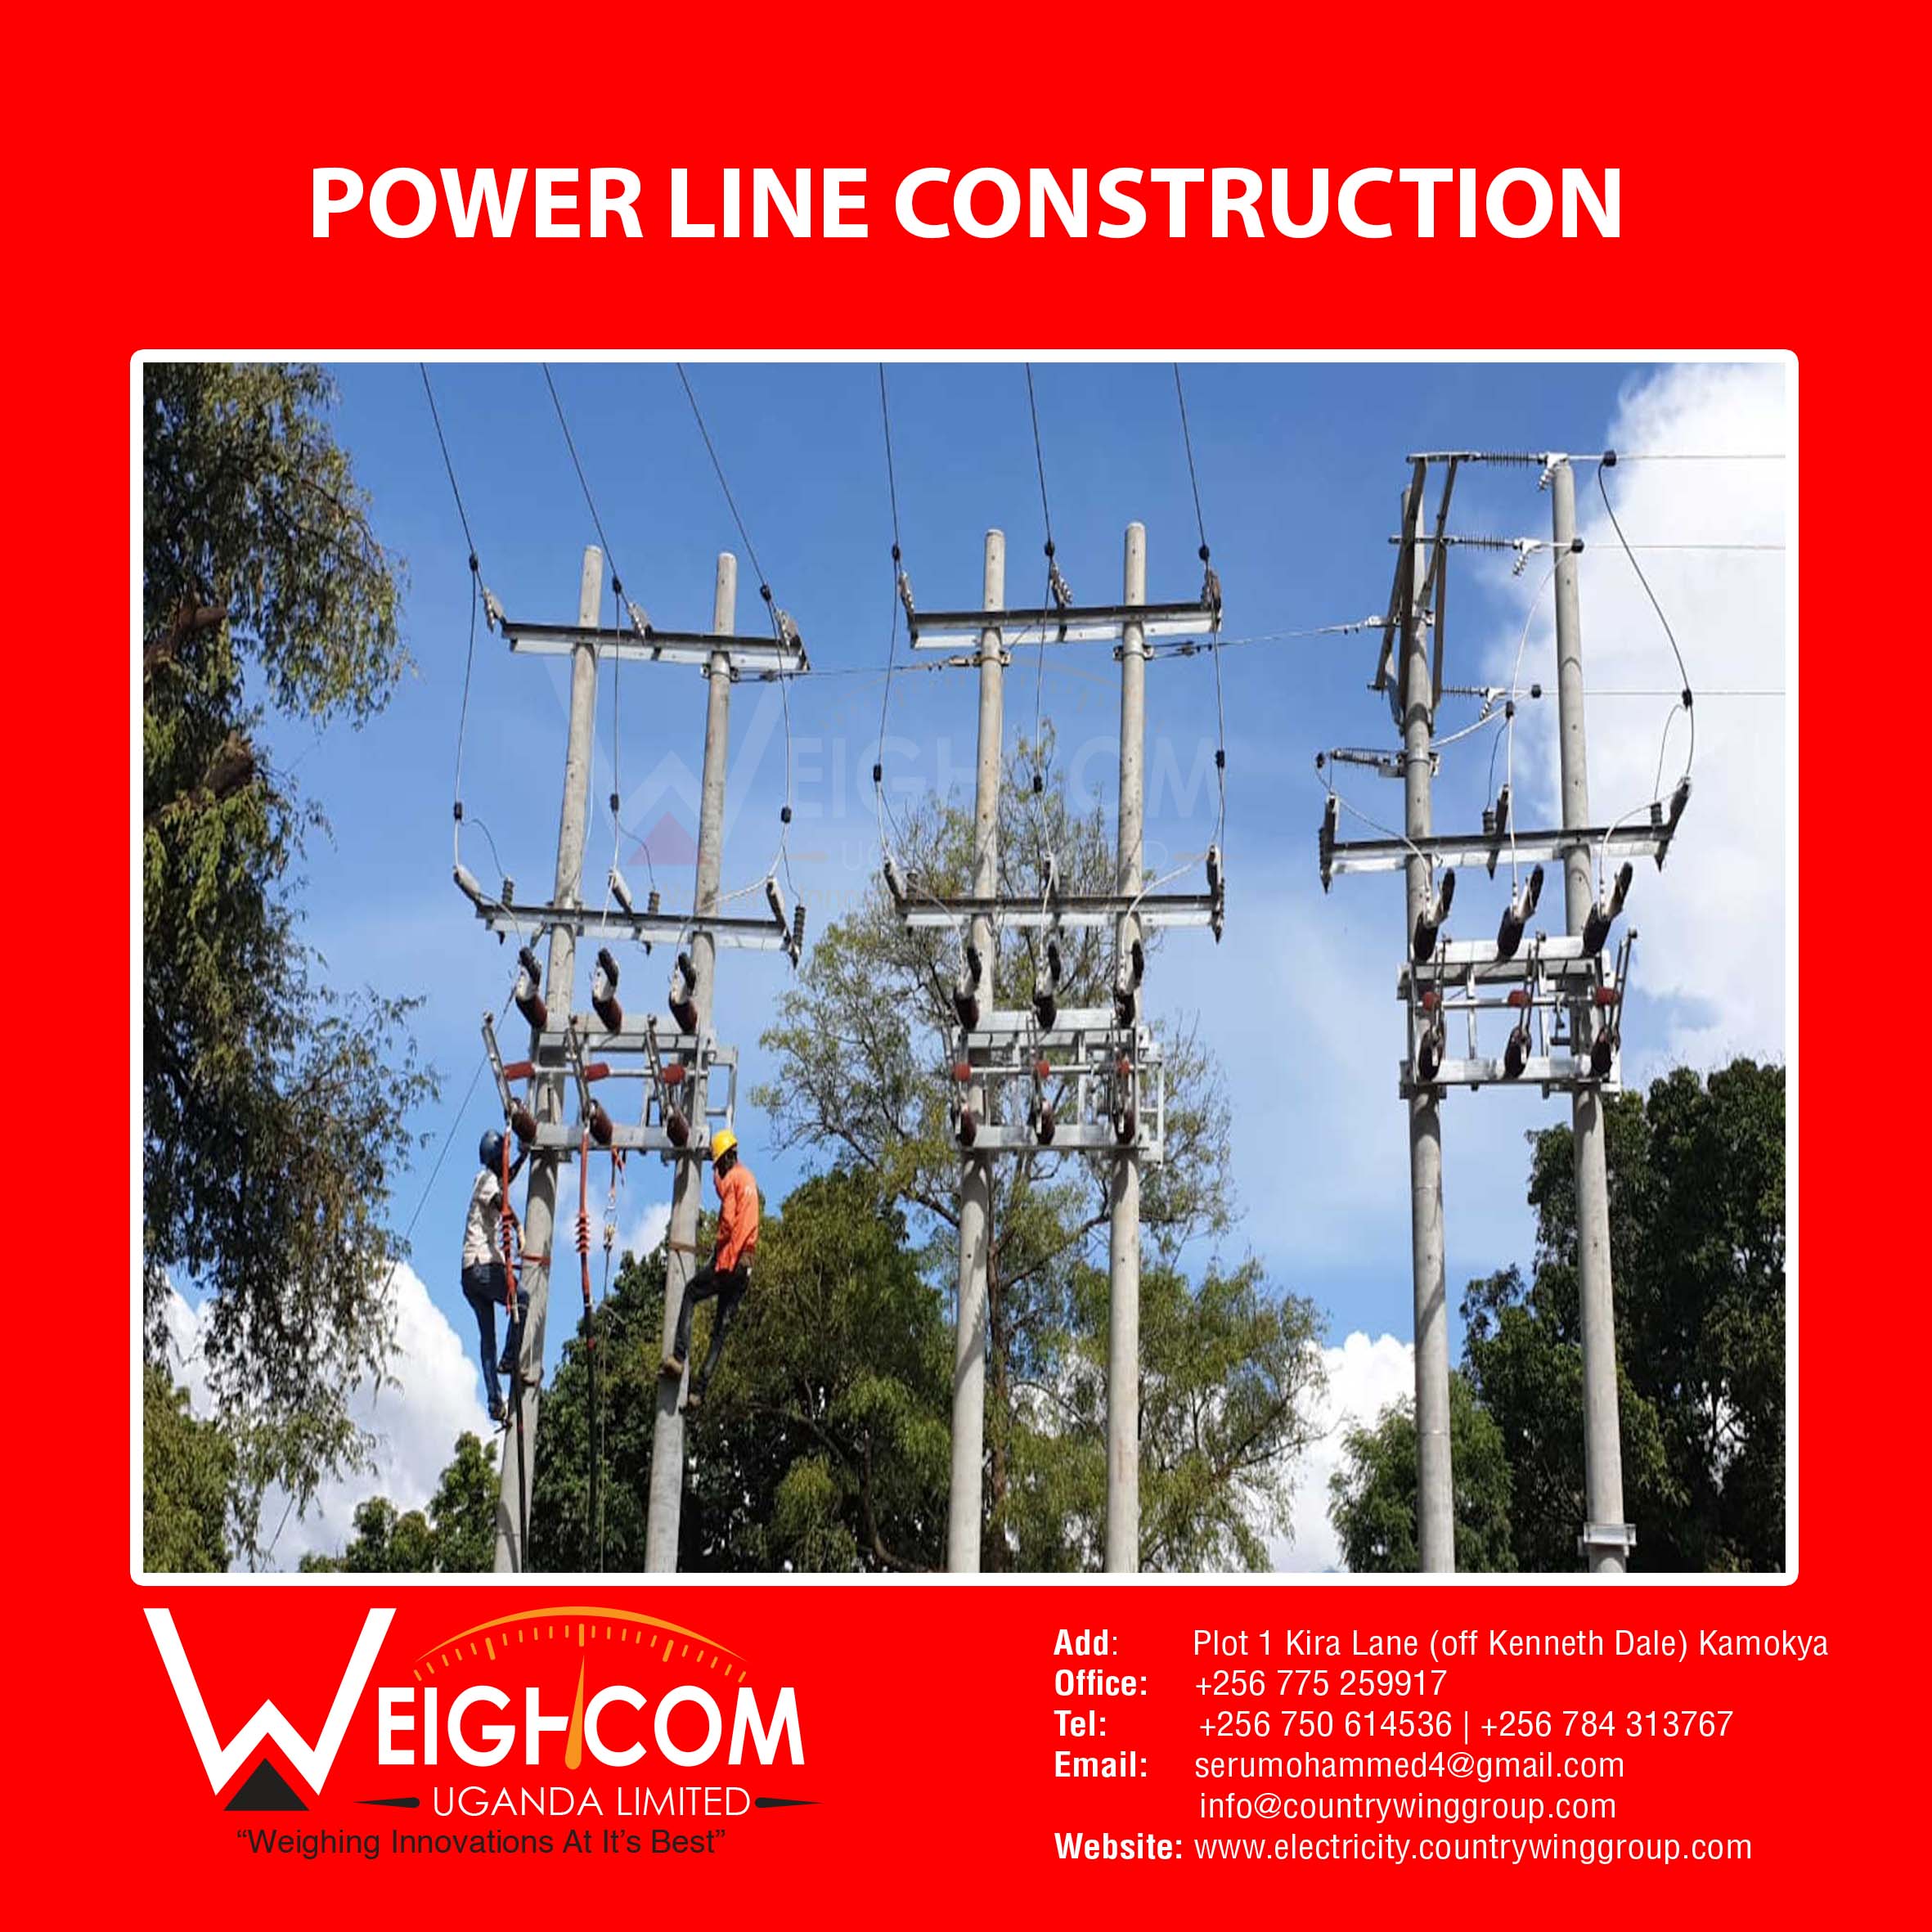 who constructs power lines in kampala? we construct them.